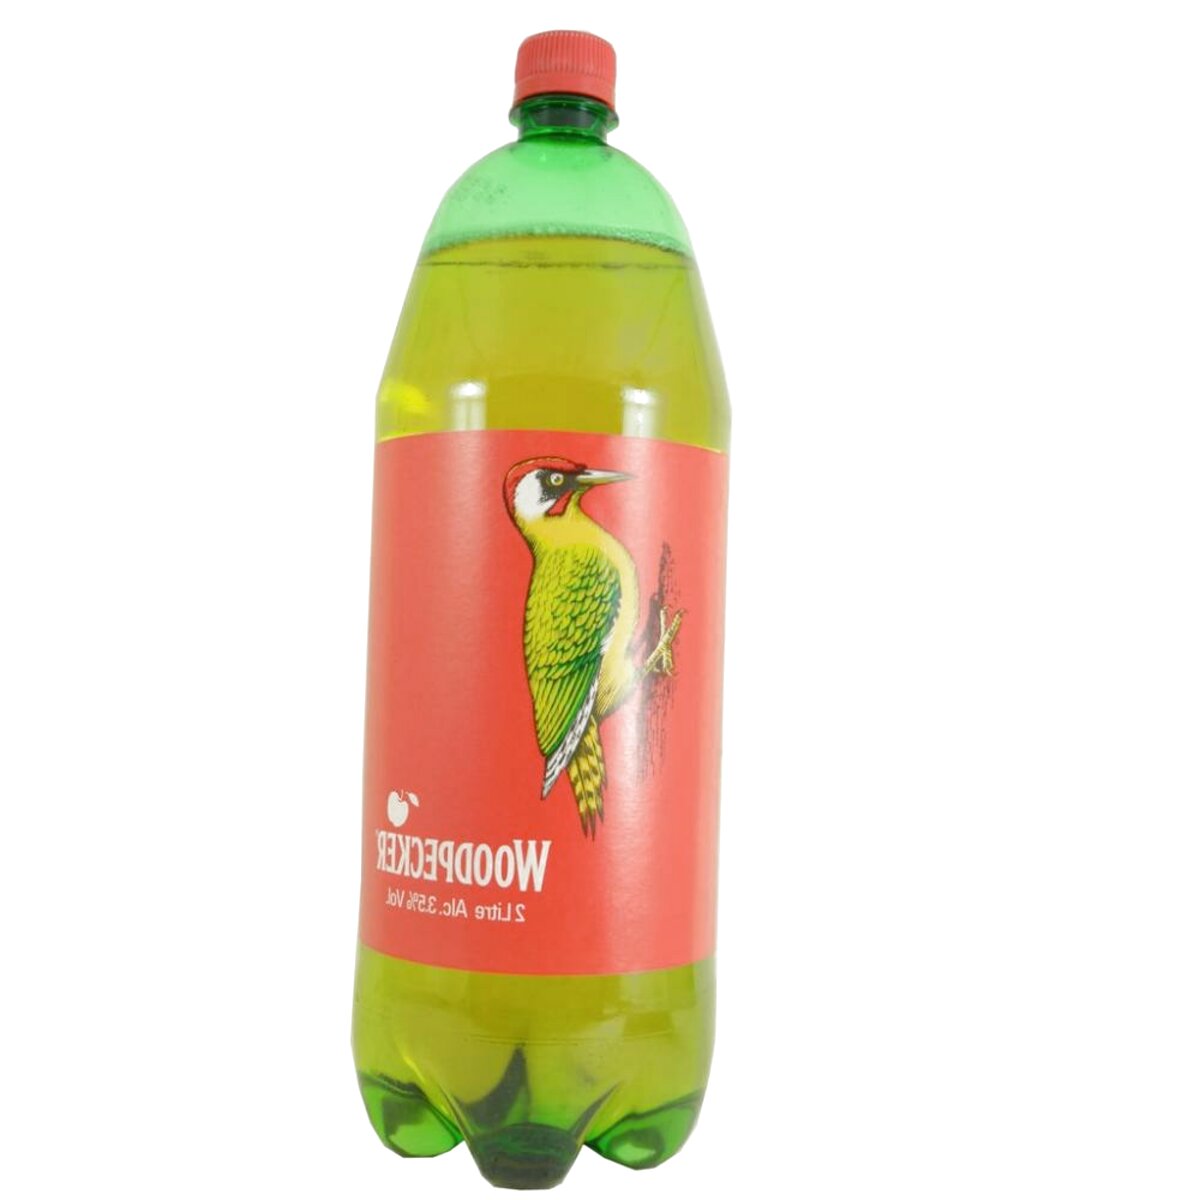 Woodpecker Cider for sale in UK | View 29 bargains